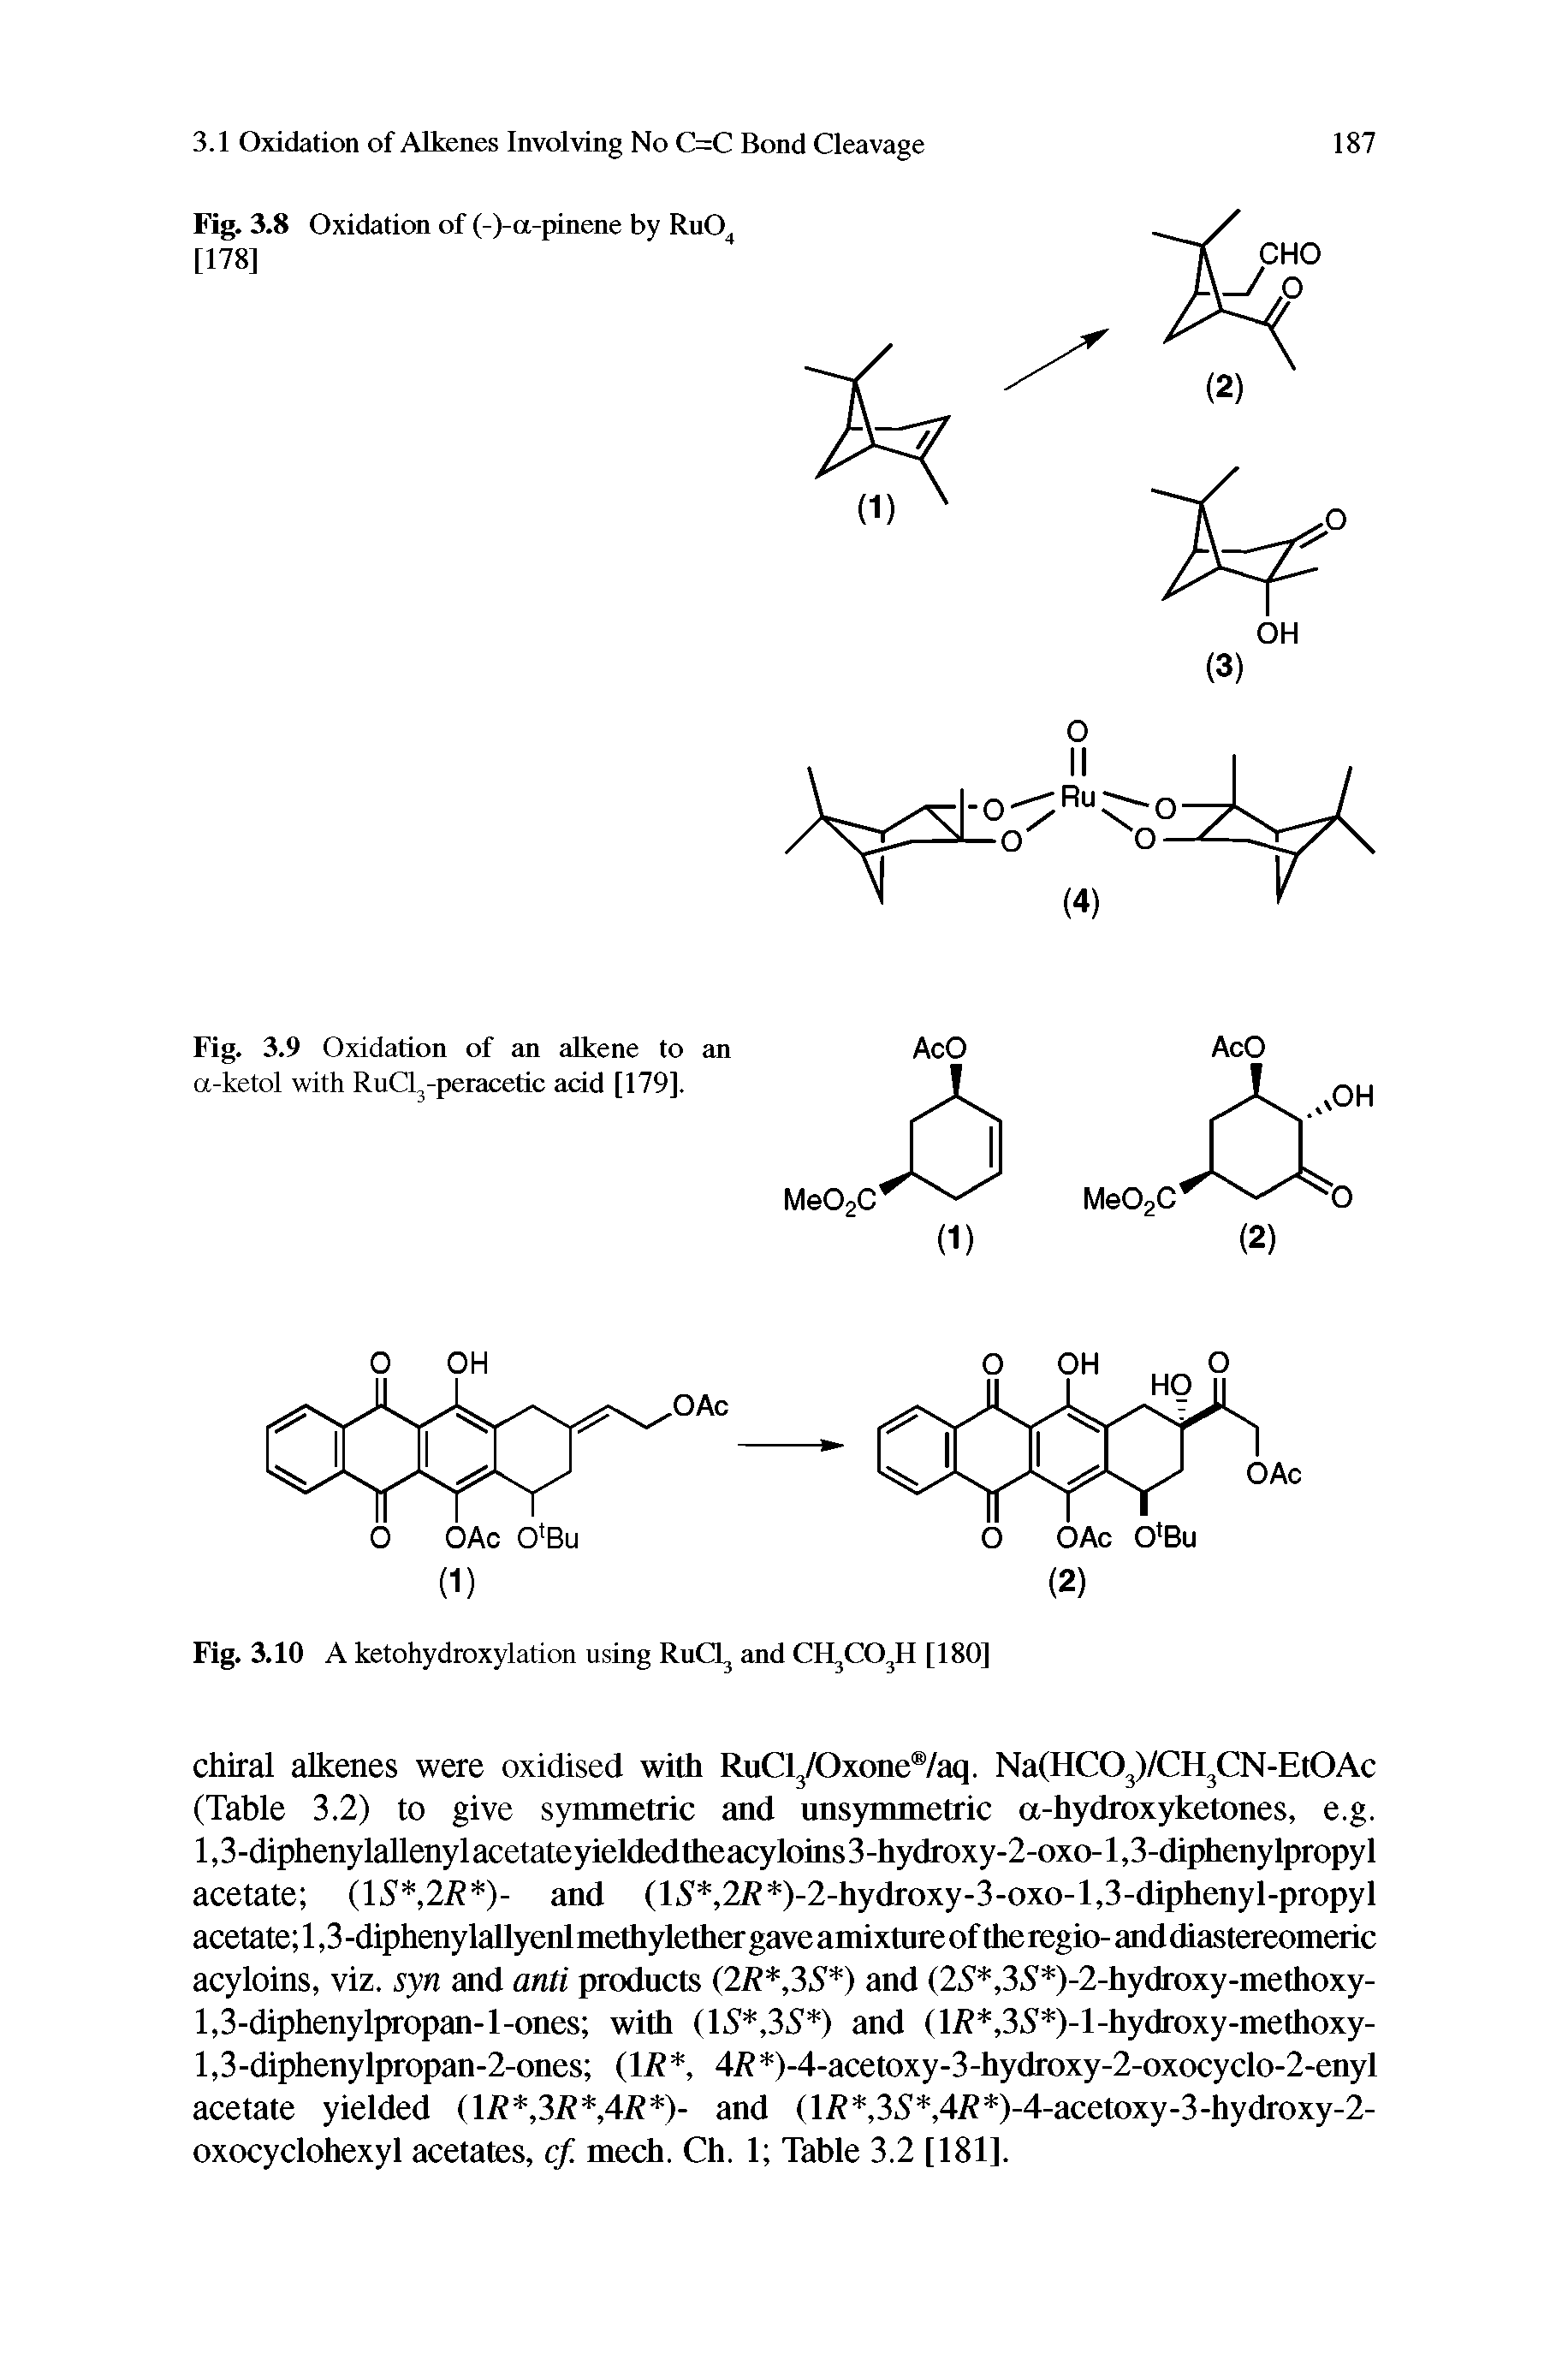 Fig. 3.9 Oxidation of an alkene to an a-ketol with RuCl -peracetic acid [179].